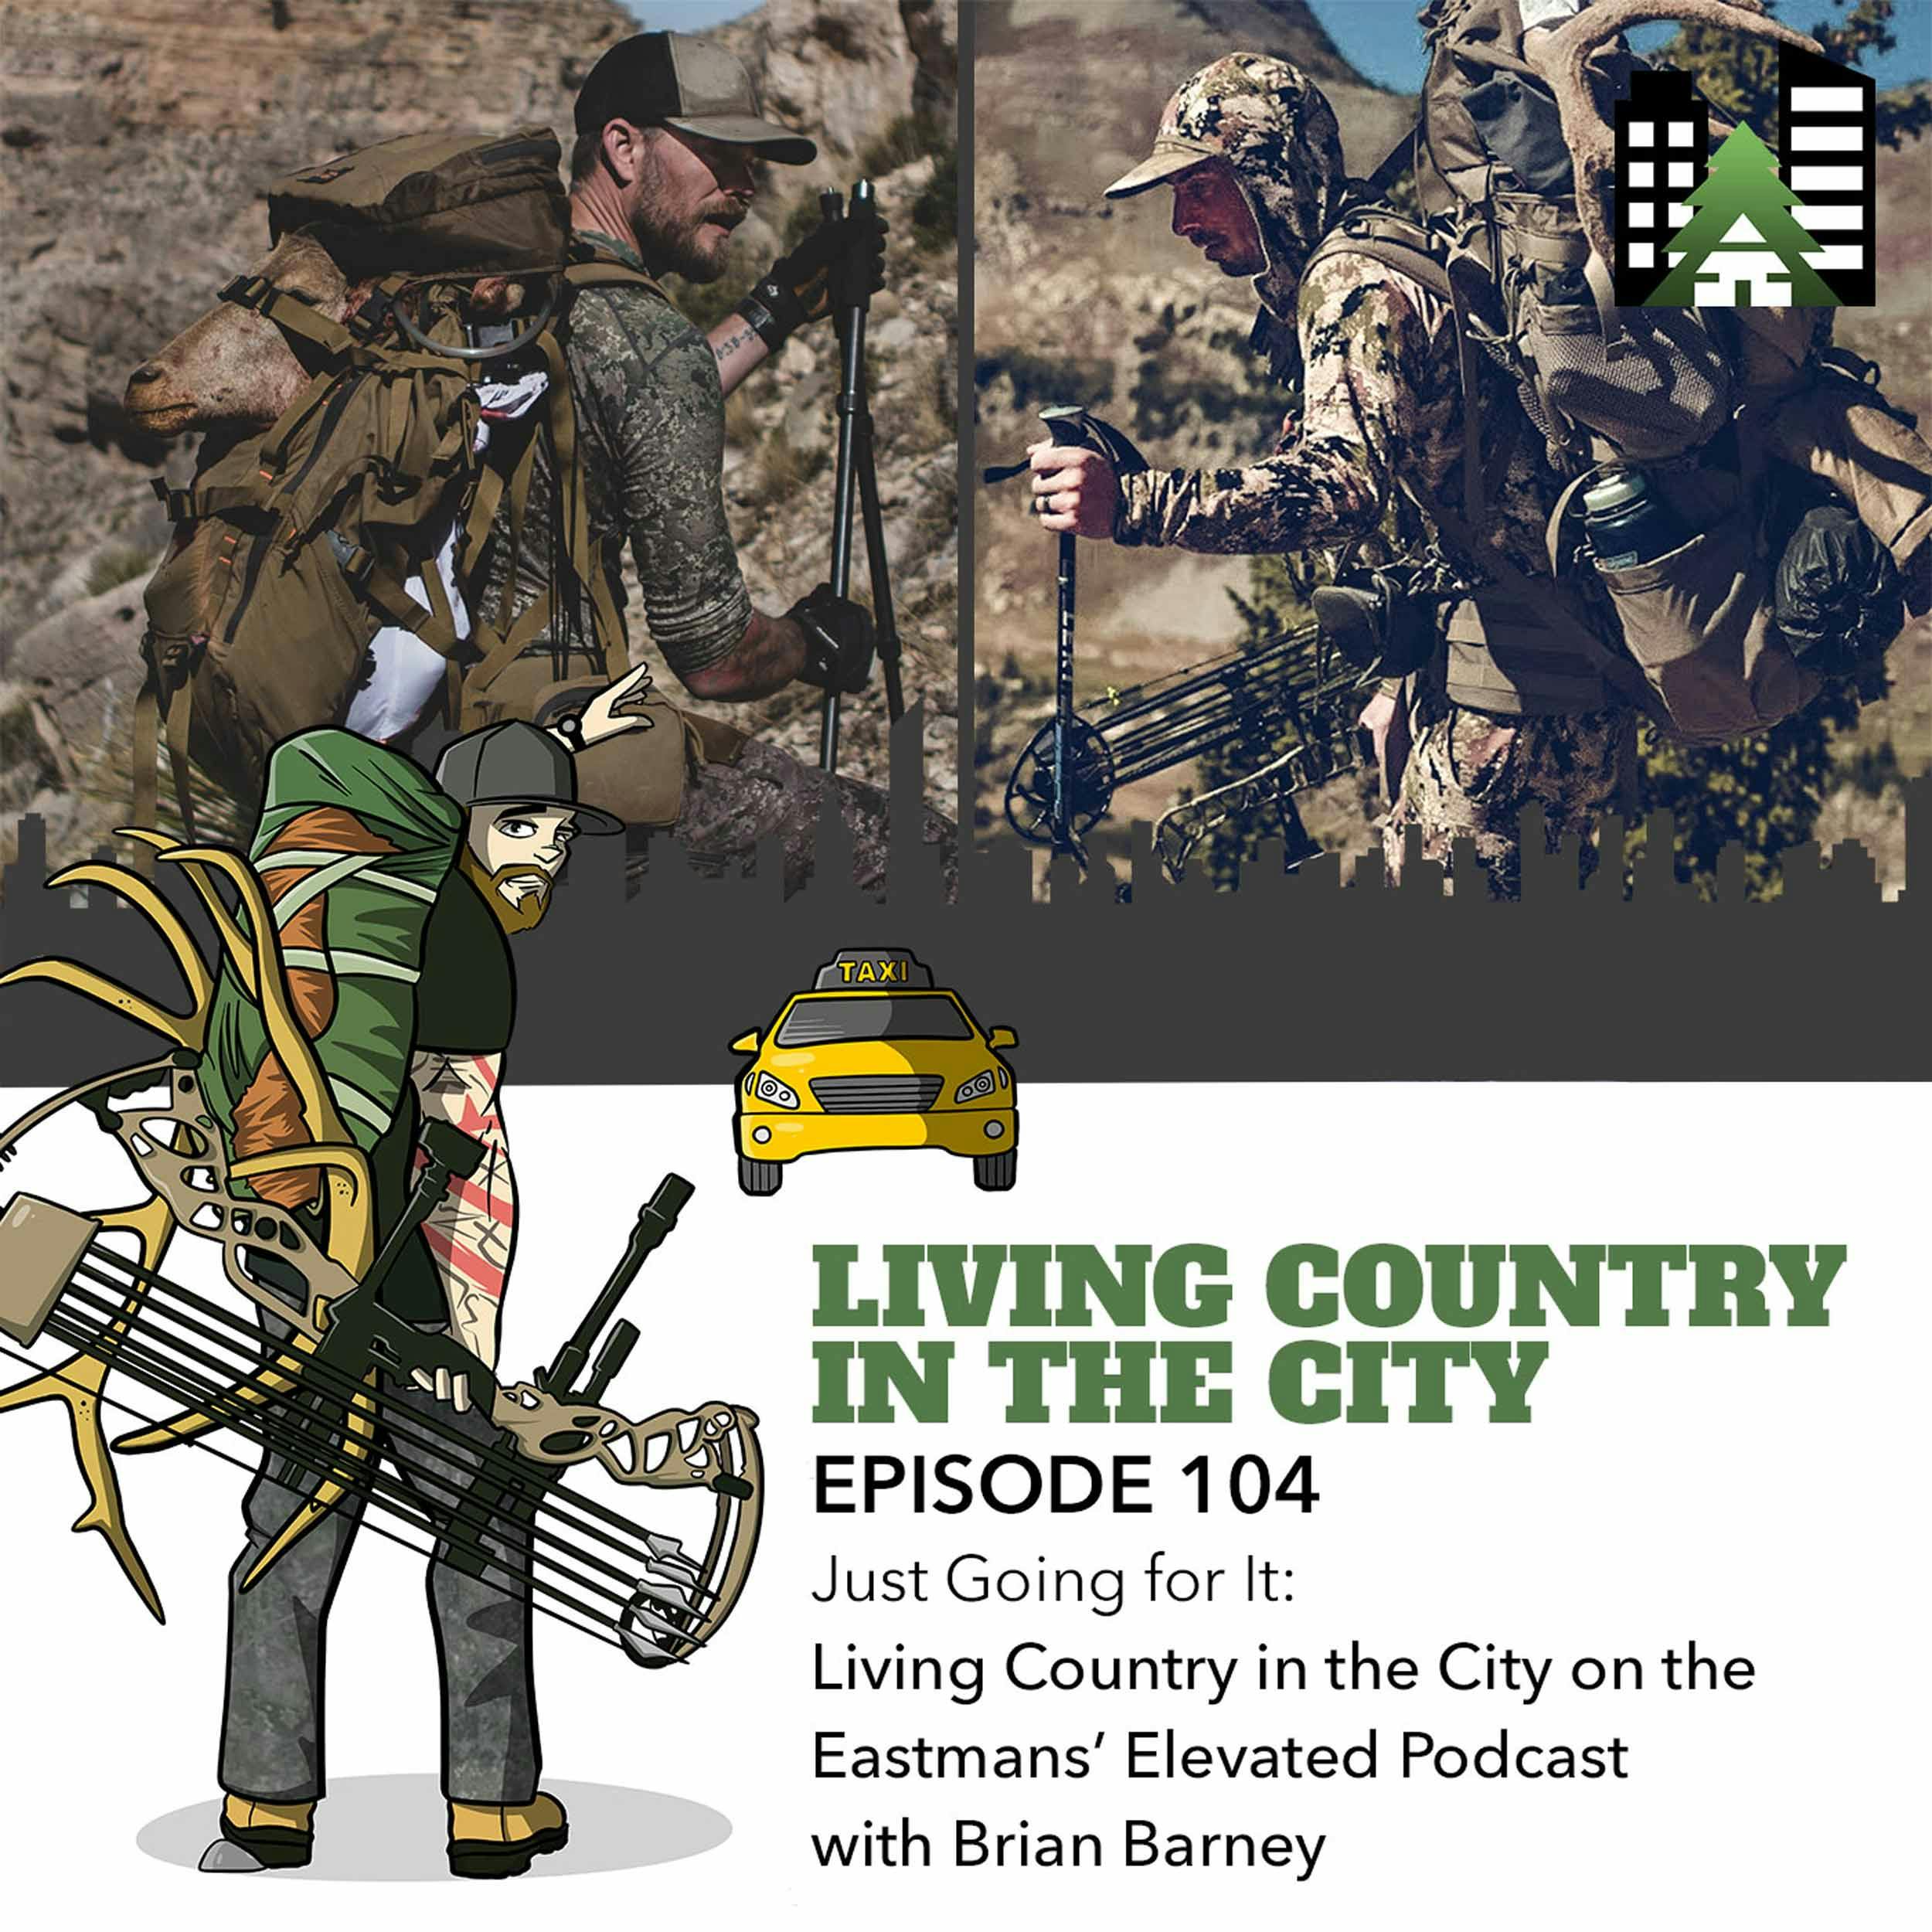 Ep 104 - Just Going for It: Living Country in the City on the Eastmans’ Elevated Podcast with Brian Barney